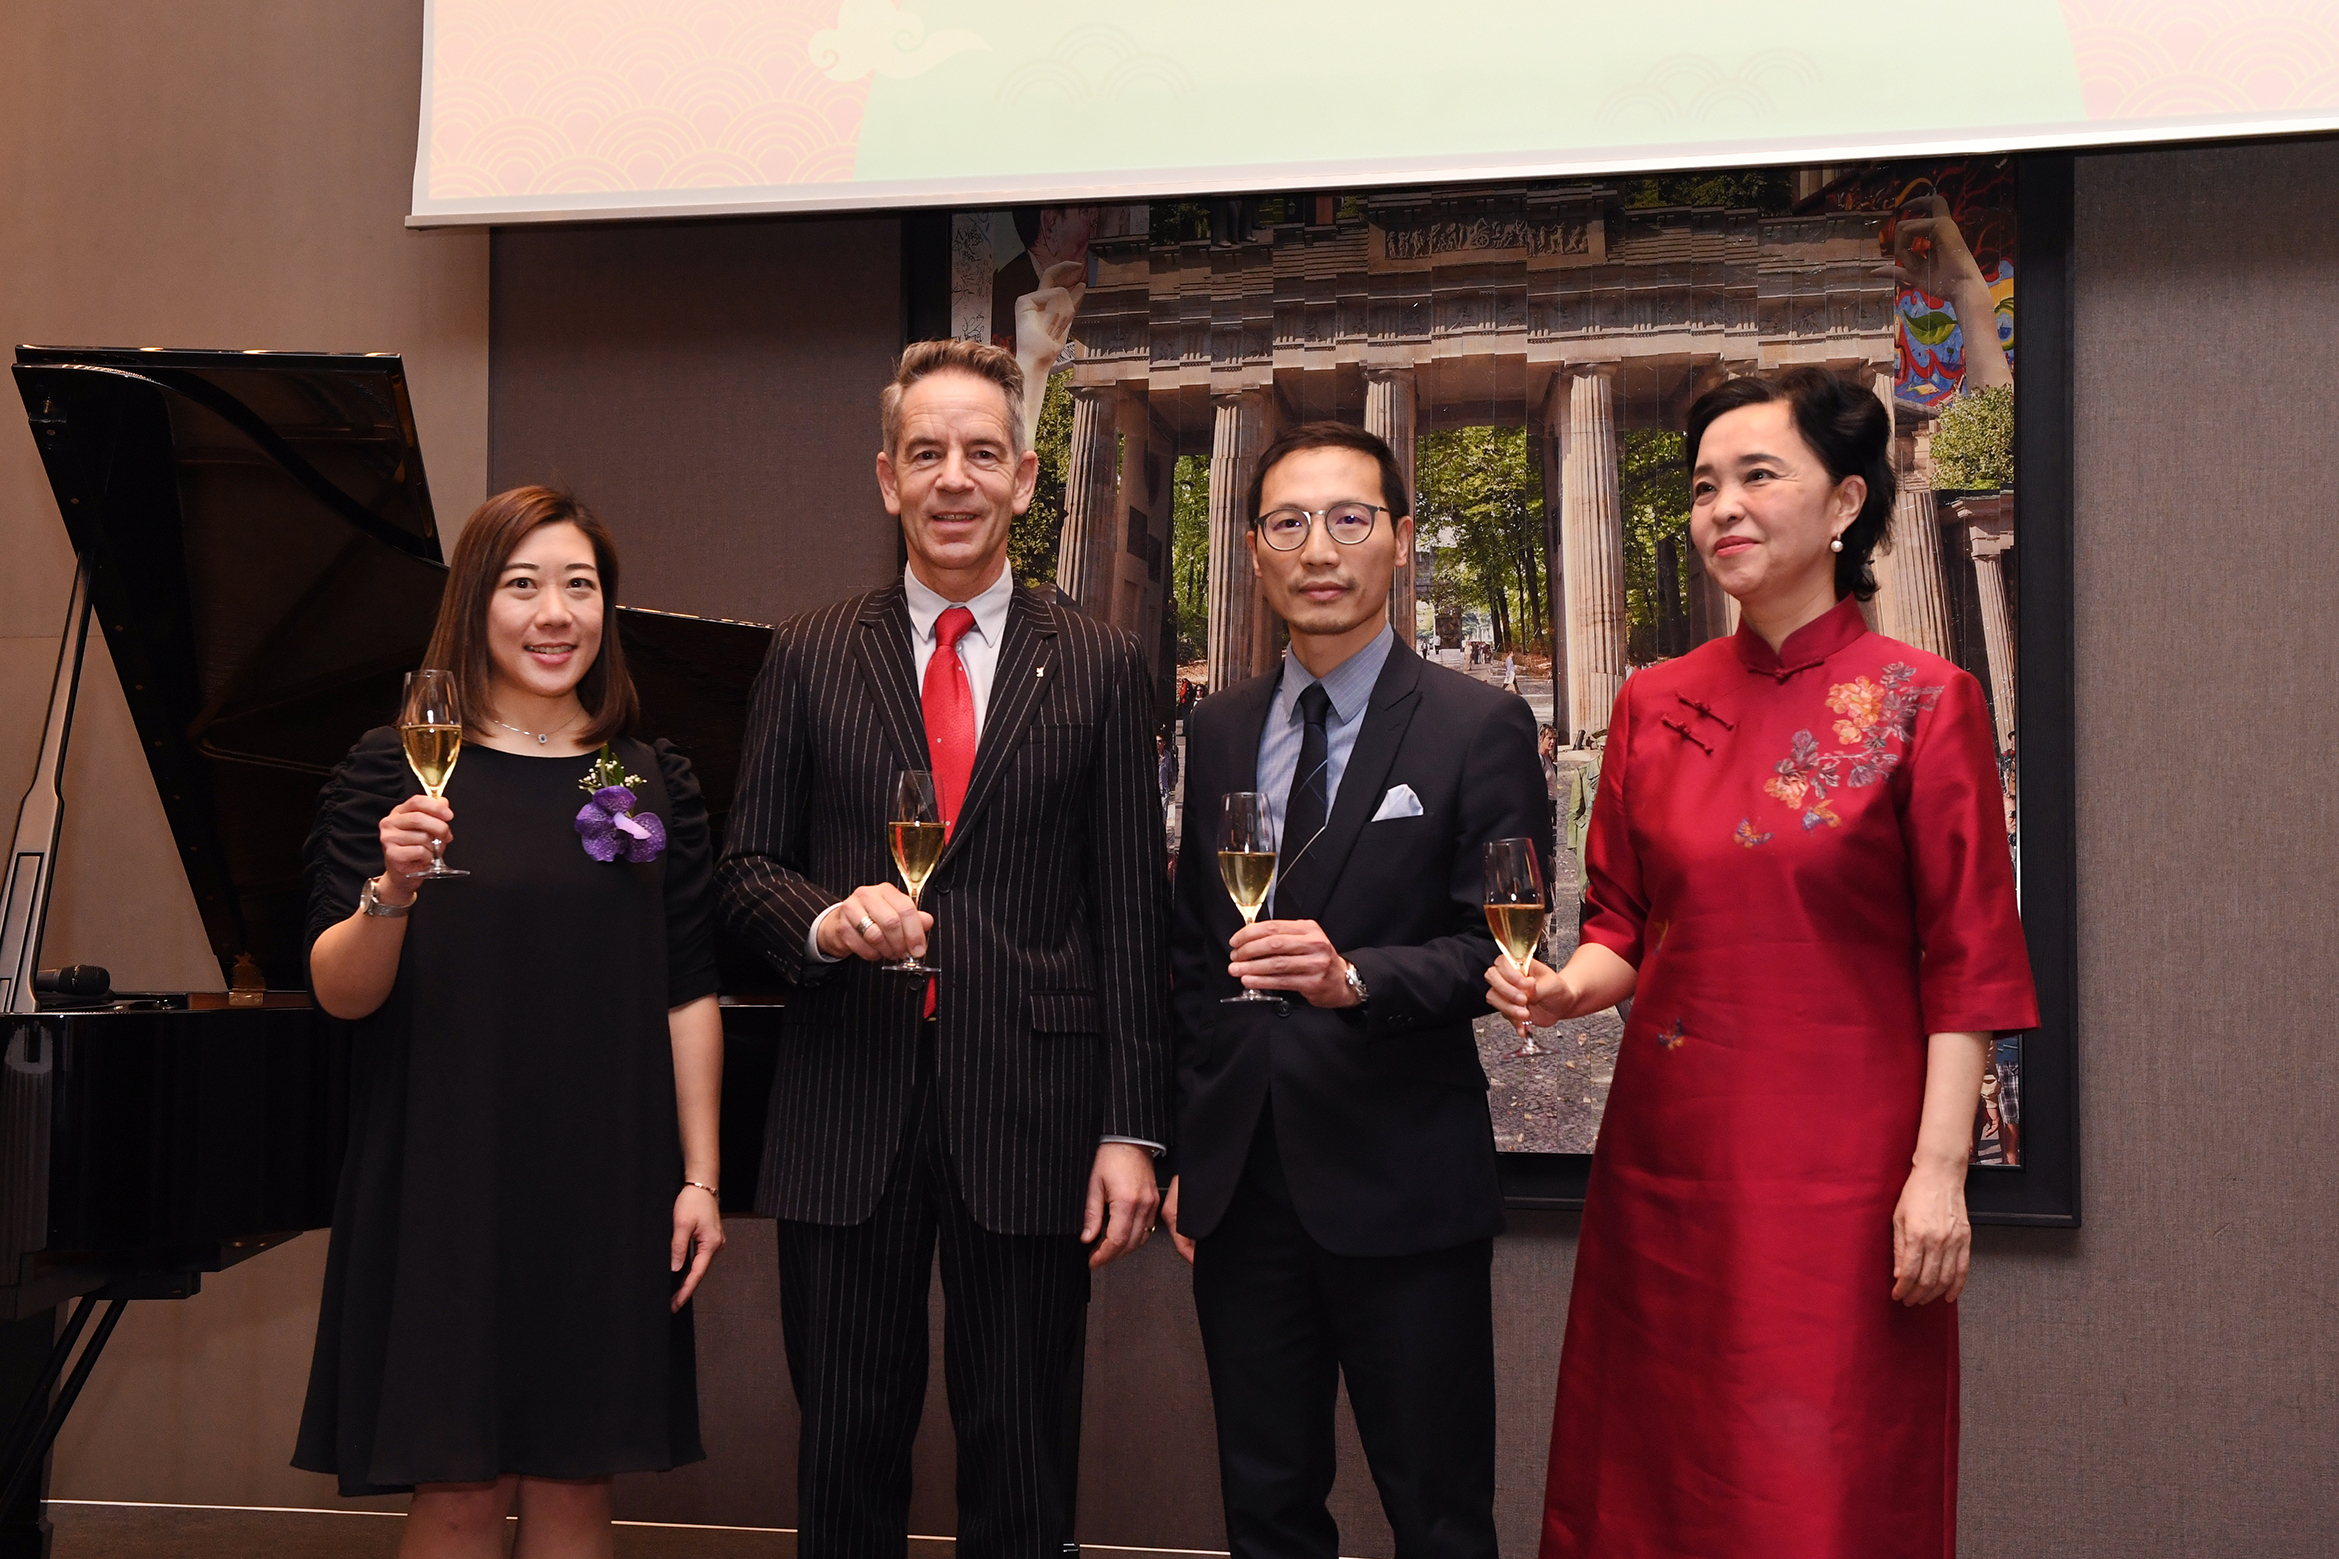 Photo shows from left: Ms Jenny Szeto, Director of HKETO Berlin; Dr Rainer Seider, Head of Division for International Relations at the Senate Chancellery; Mr Silas Chu, Regional Director, Europe, Central Asia & Israel of the Hong Kong Trade Development Council and Ms Ying-ru Zeng, Envoy of the Chinese Embassy in Germany at the toasting ceremony during the Chinese New Year reception held in Berlin, Germany, on February 13 (Berlin time).